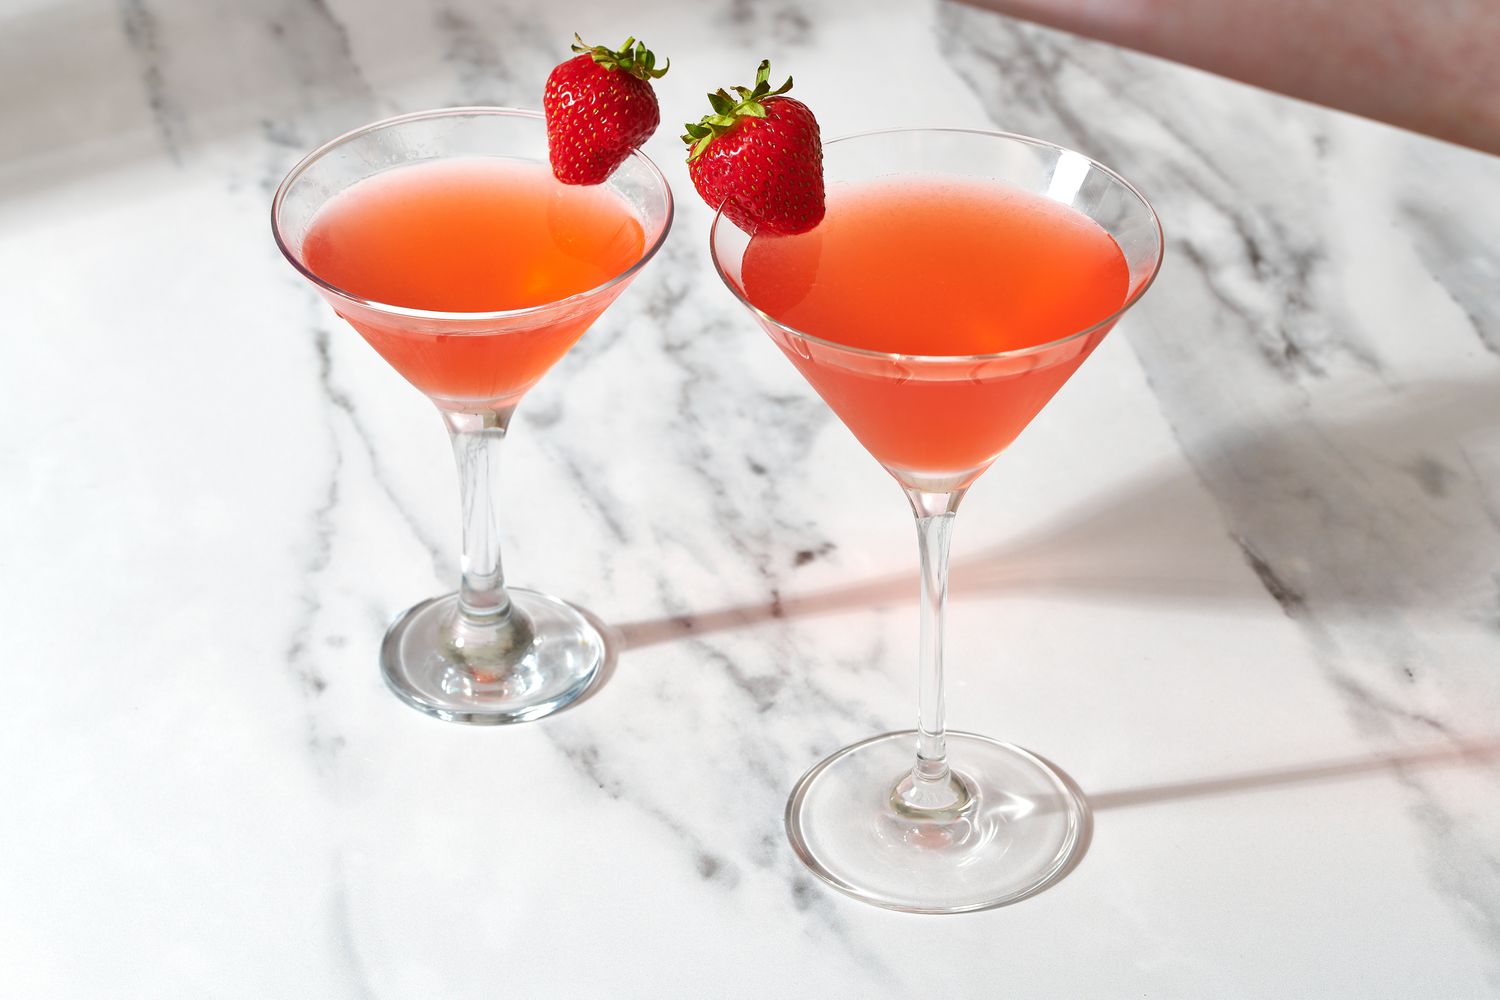 Two strawberry martinis on a marble surface, garnished with a fresh strawberry